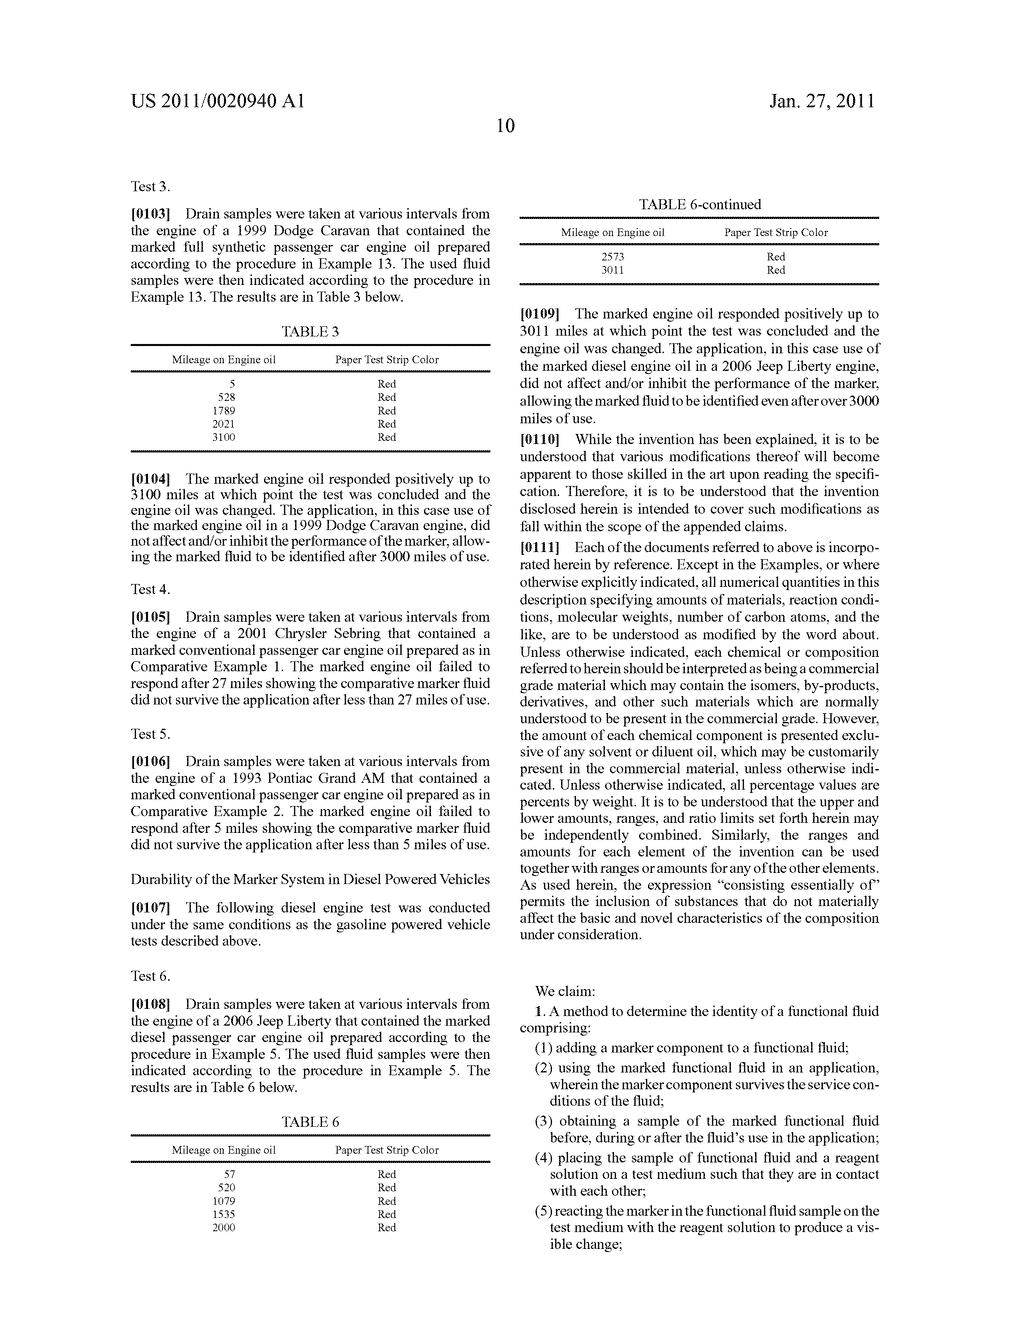 Marker Dyes for Petroleum Products - diagram, schematic, and image 11